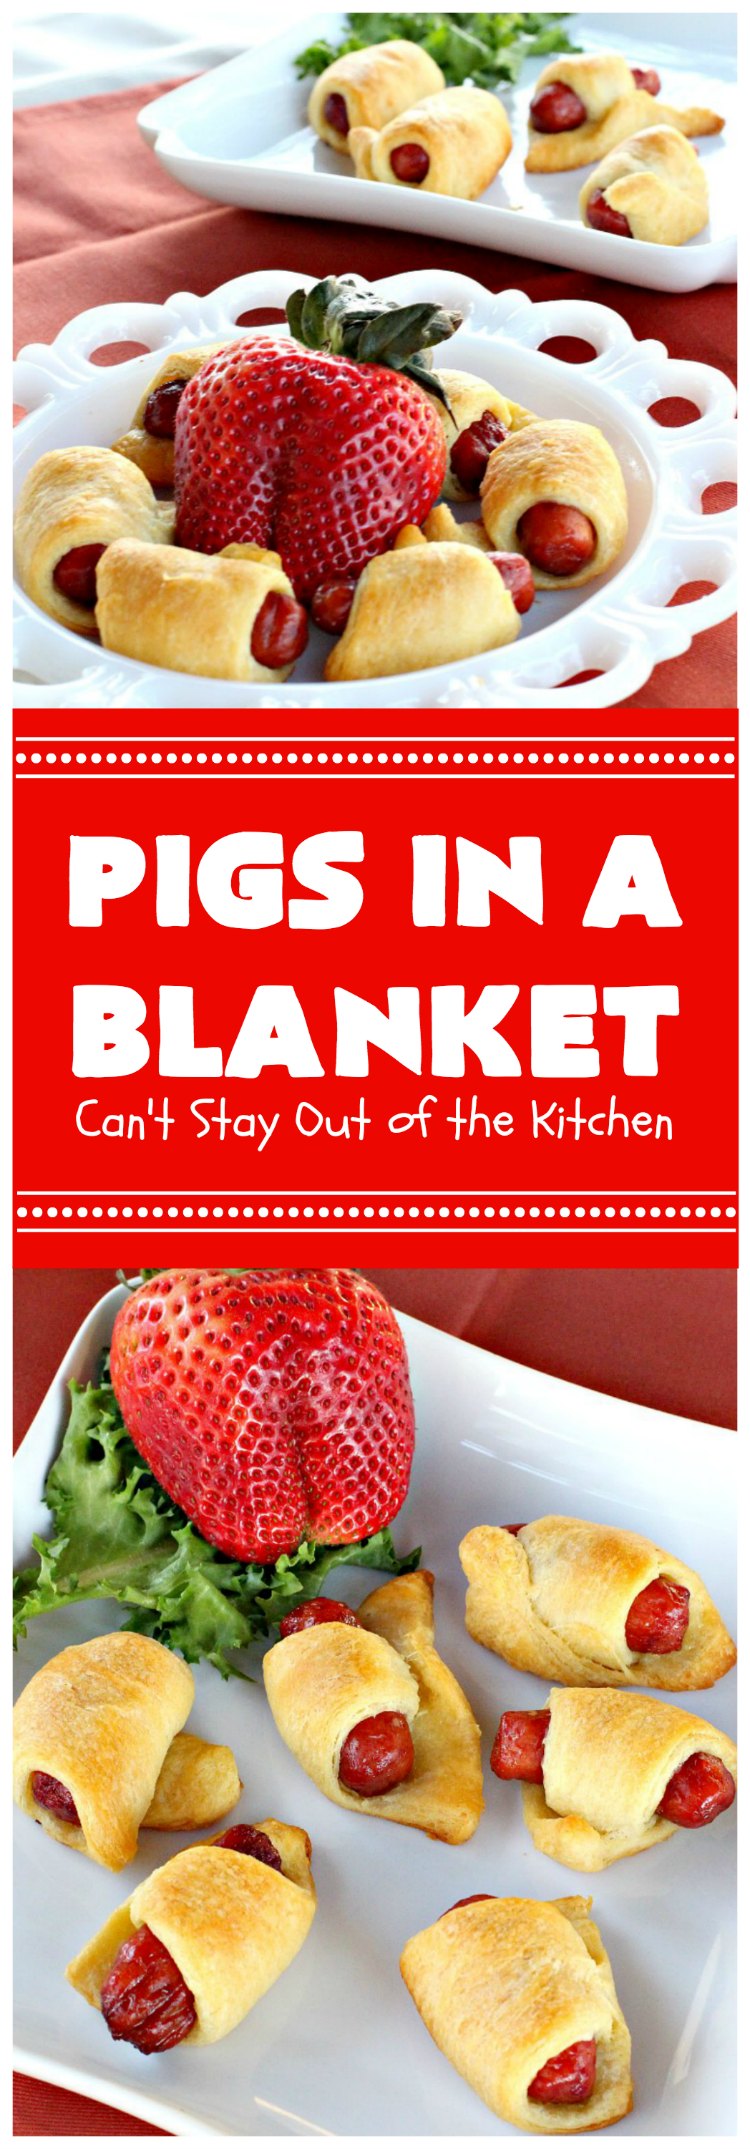 Pigs in a Blanket | Can't Stay Out of the Kitchen